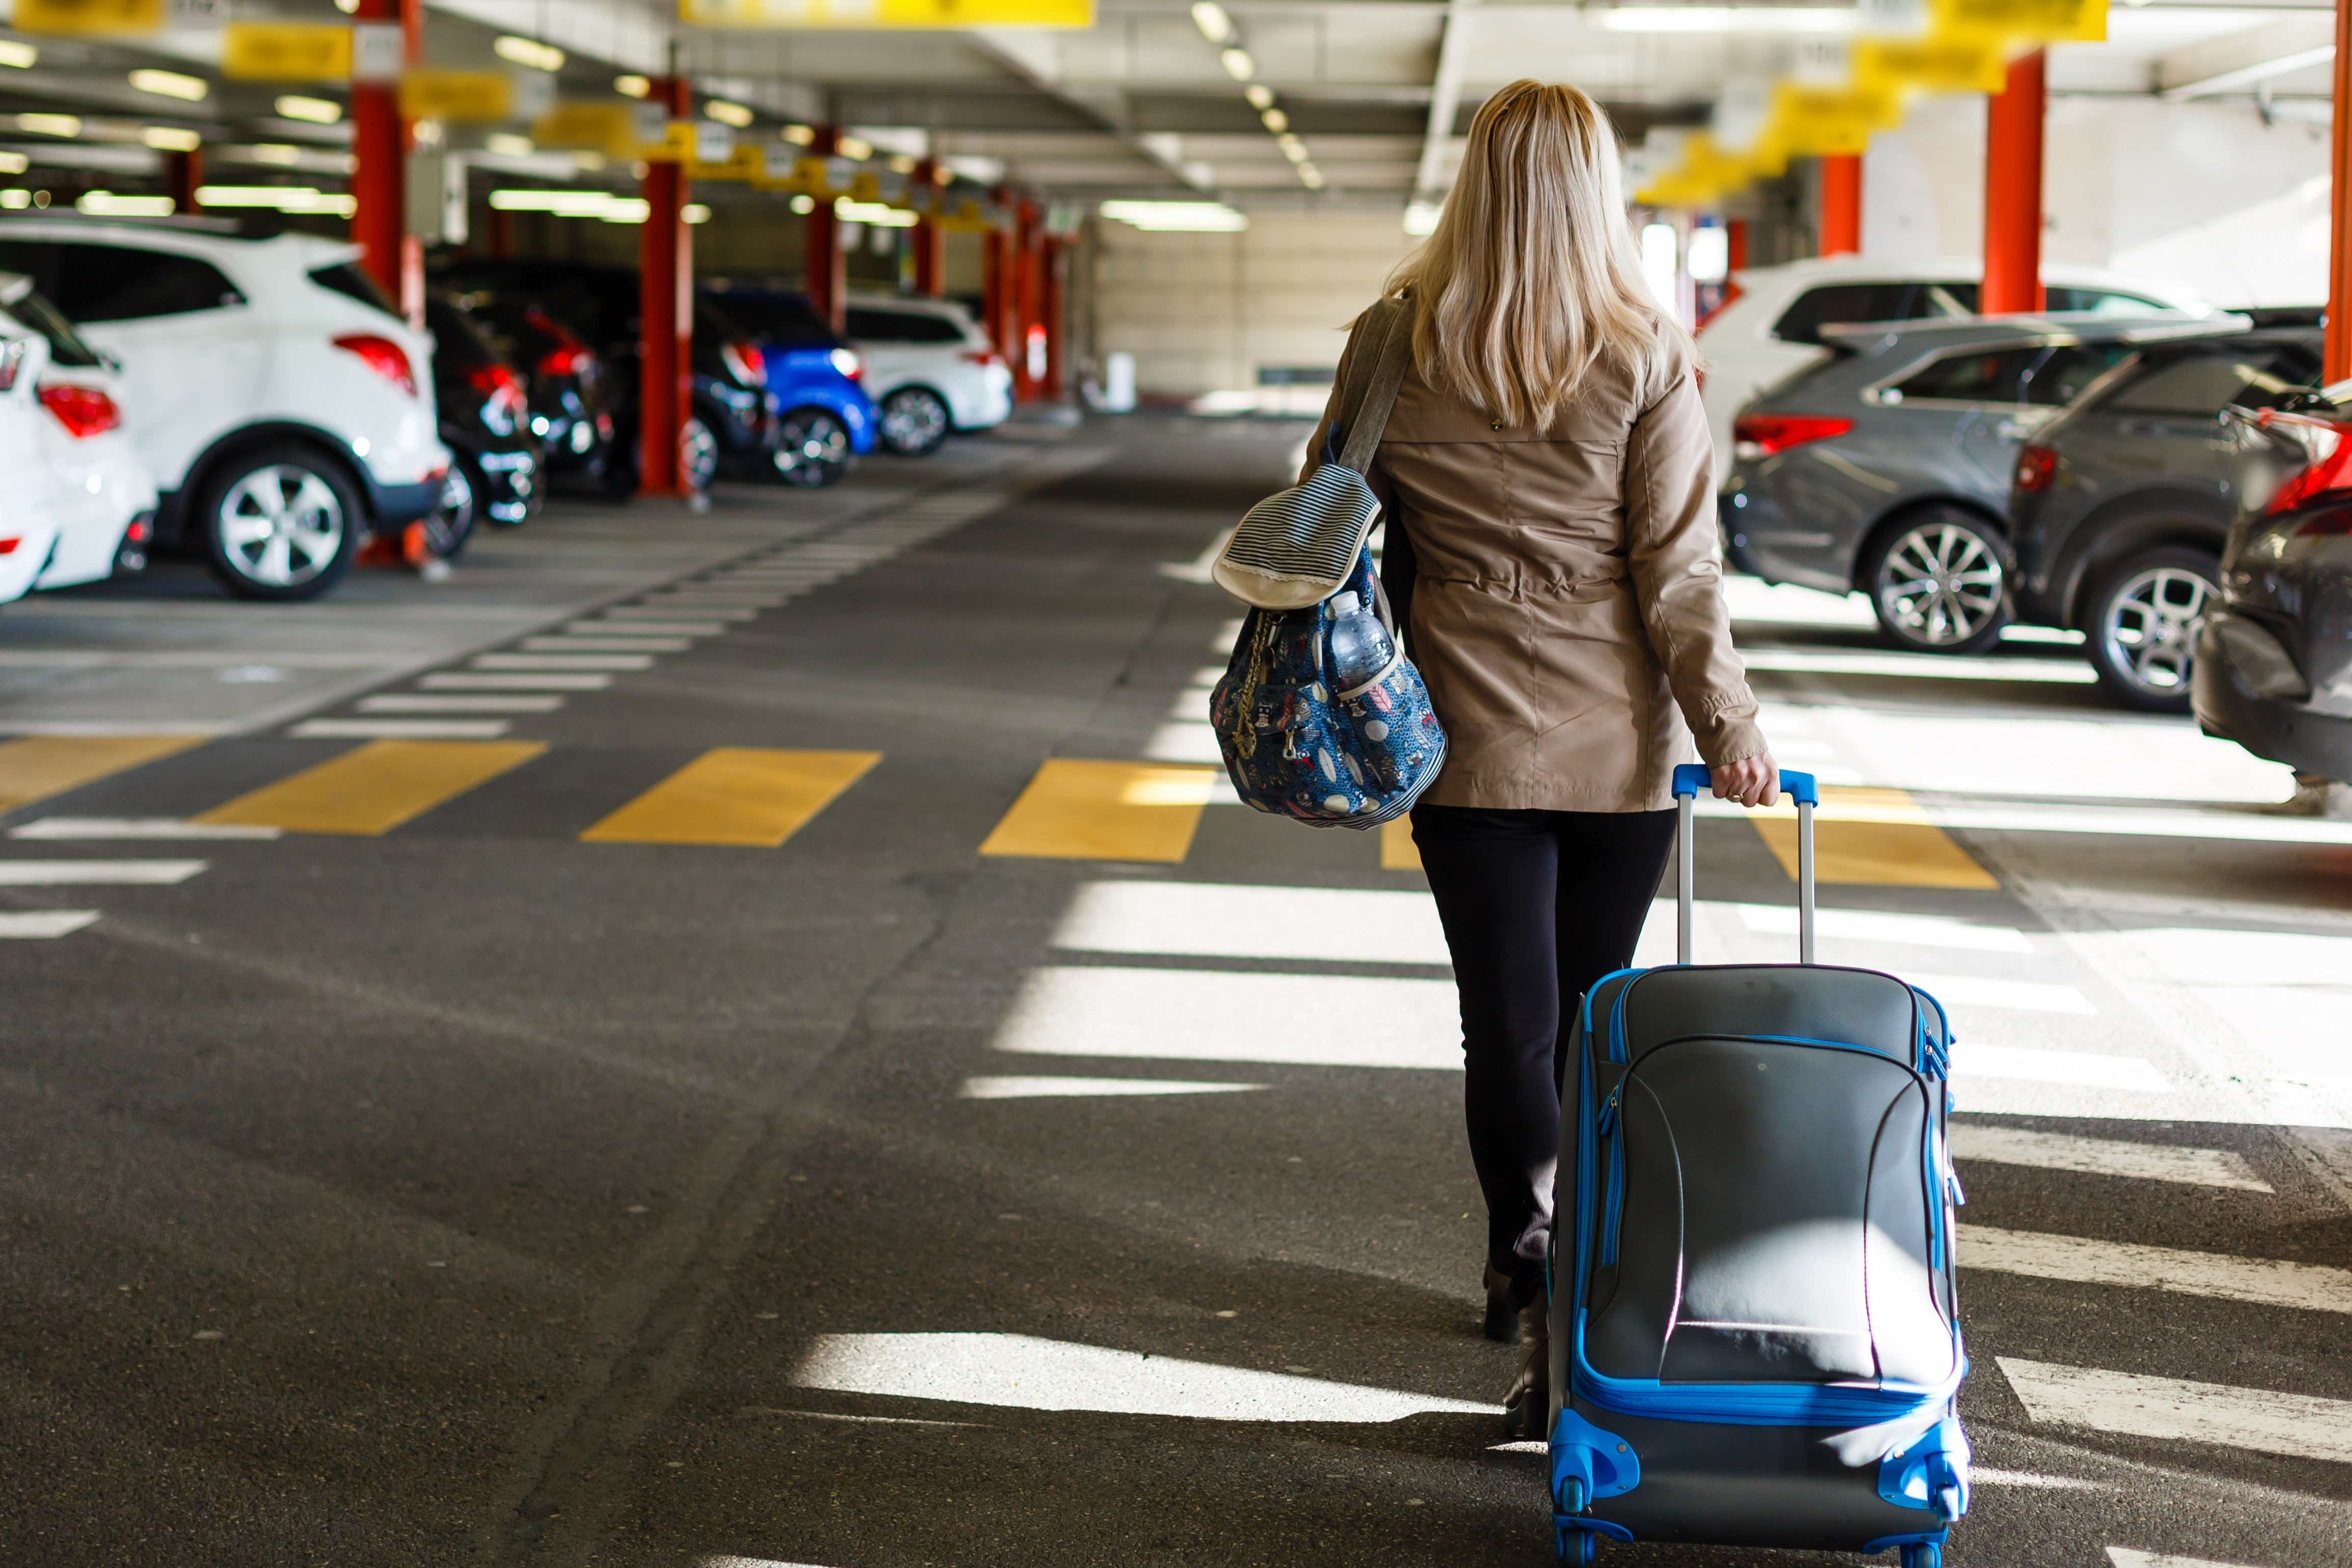 A woman heads to the terminal with her luggage after parking her car at the airport